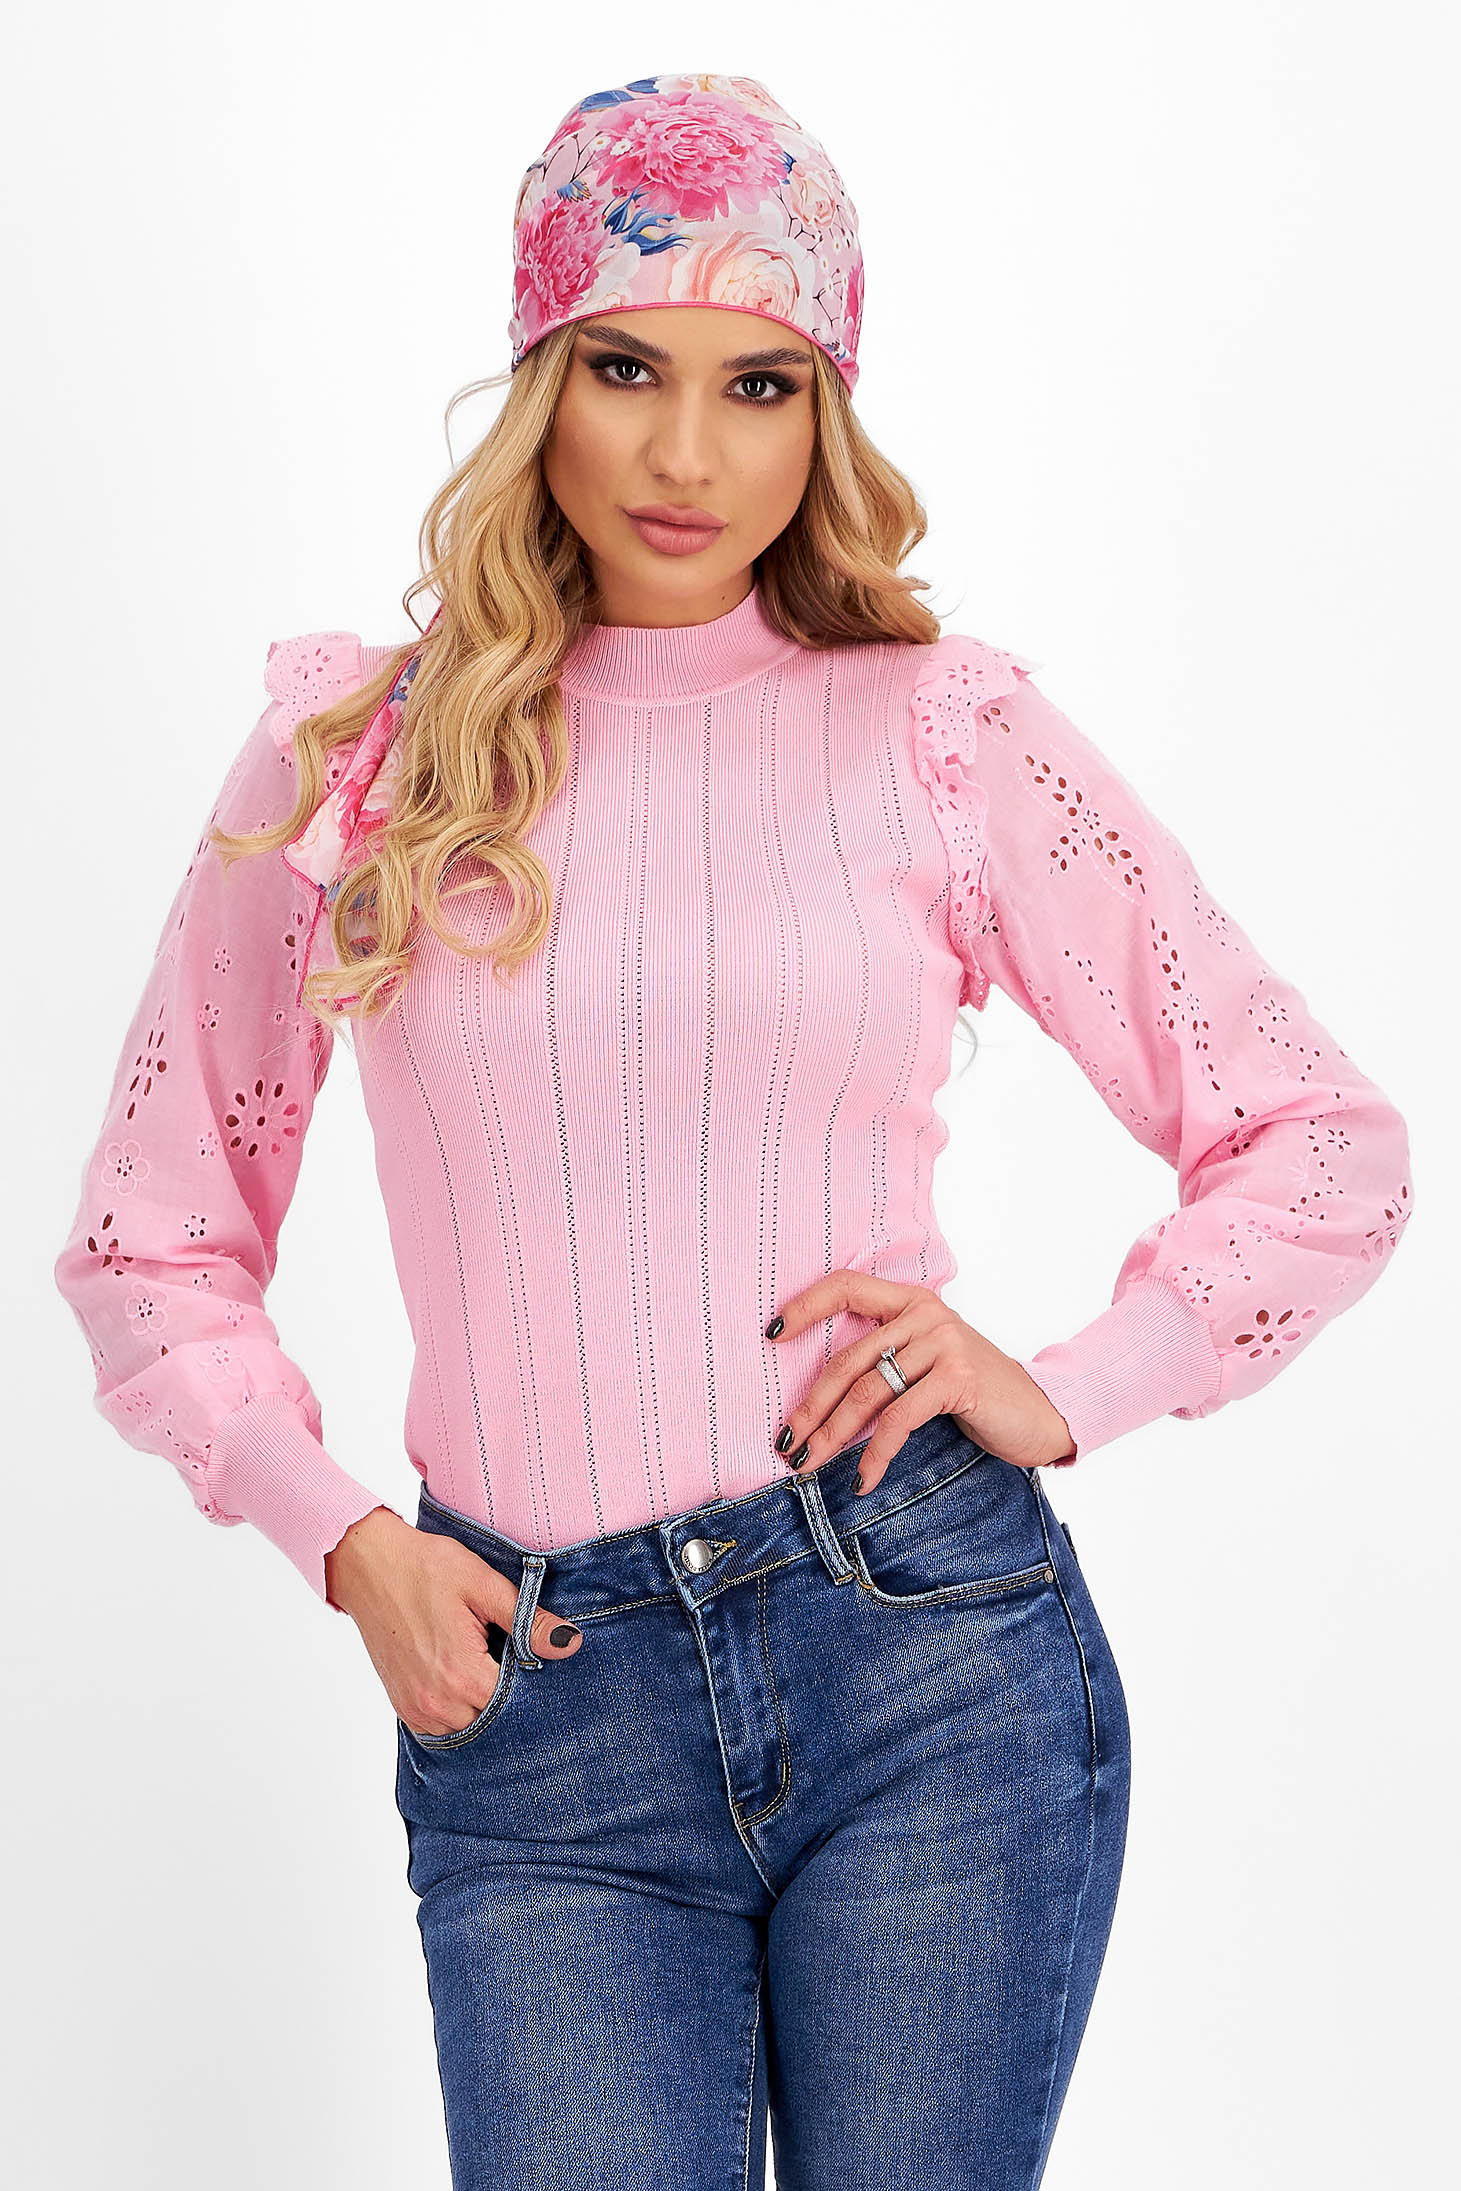 Ladies' Light Pink Slim-Fit Knit Blouse with Lace Sleeves - SunShine